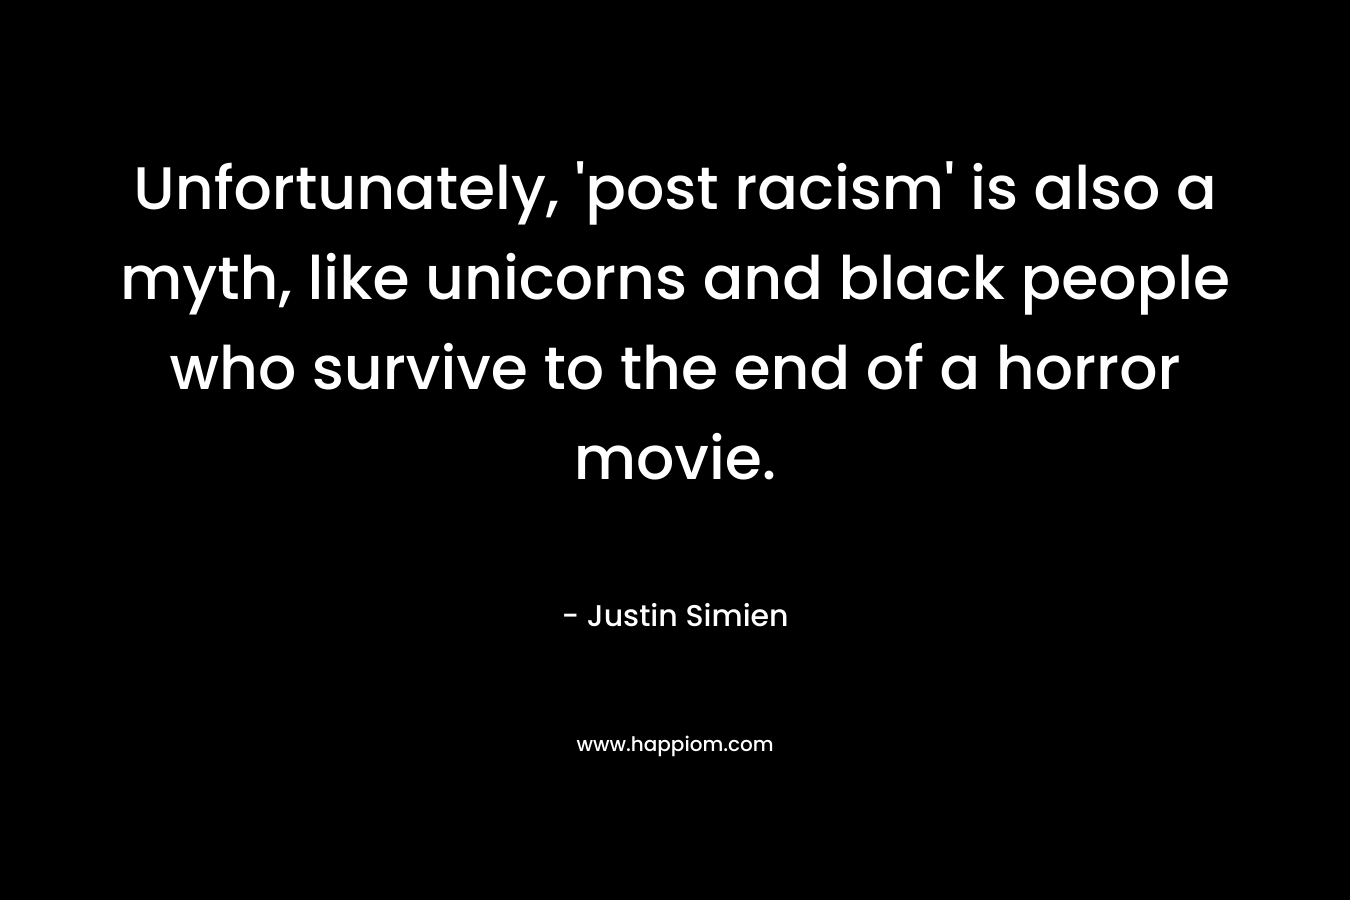 Unfortunately, ‘post racism’ is also a myth, like unicorns and black people who survive to the end of a horror movie. – Justin Simien